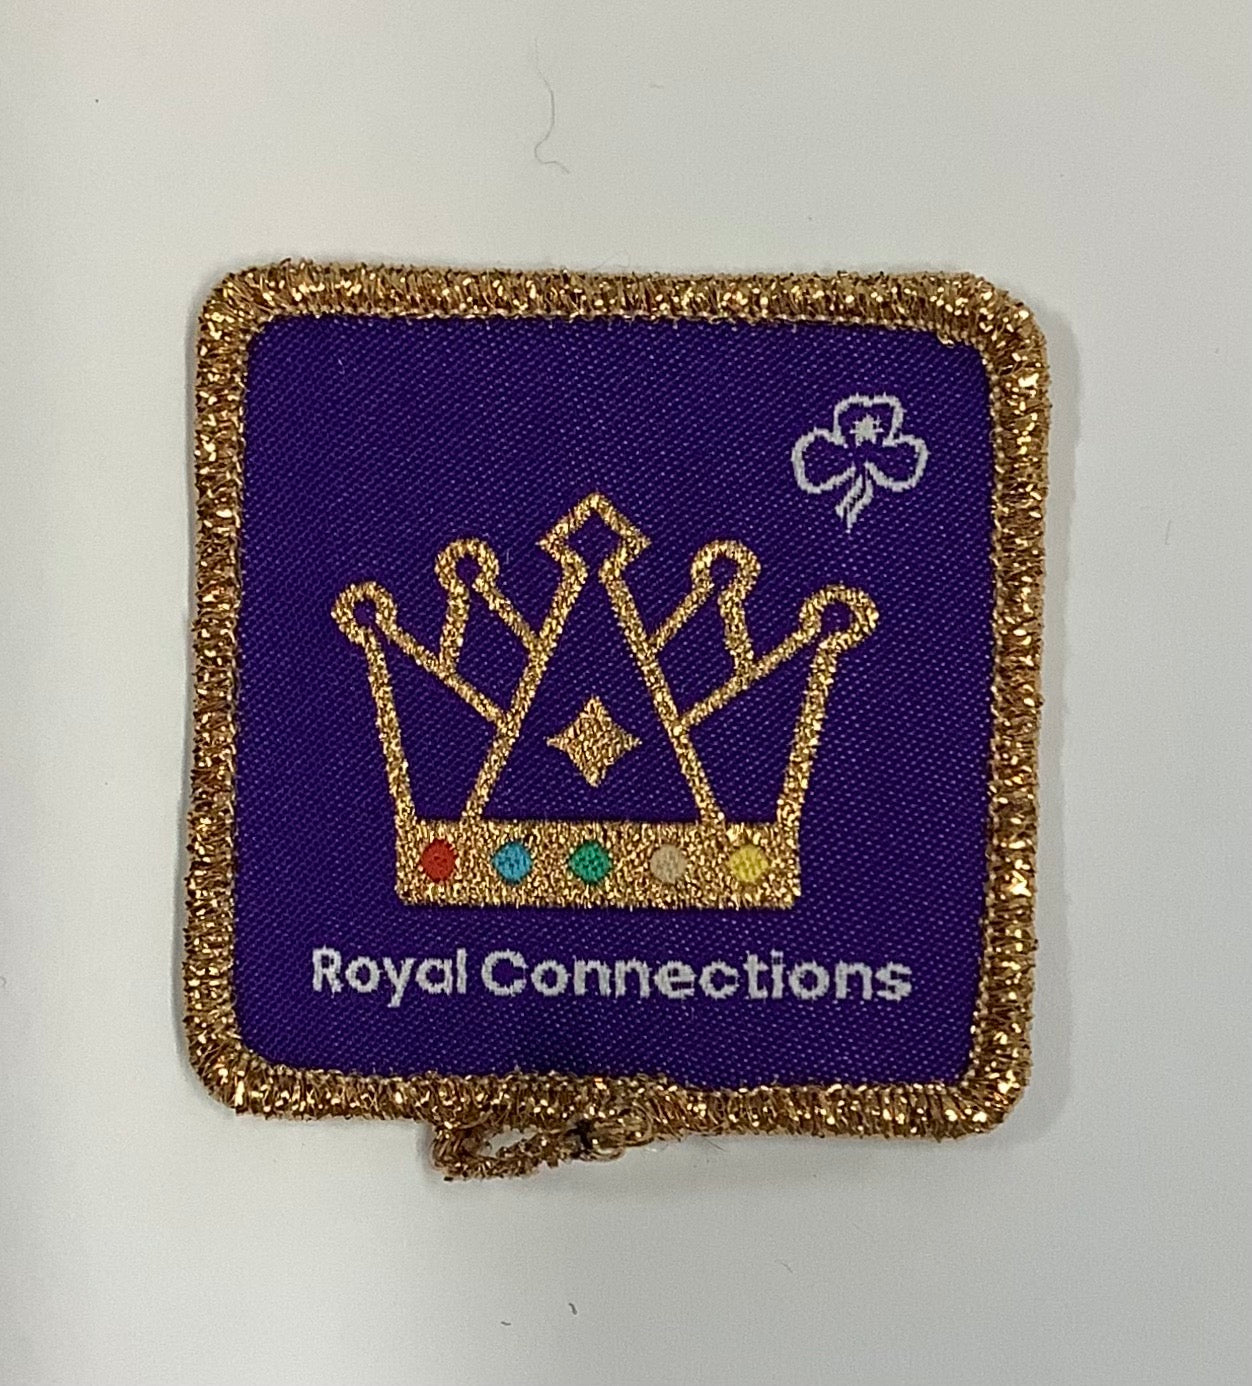 a square purple badge bound in gold with a gold crown